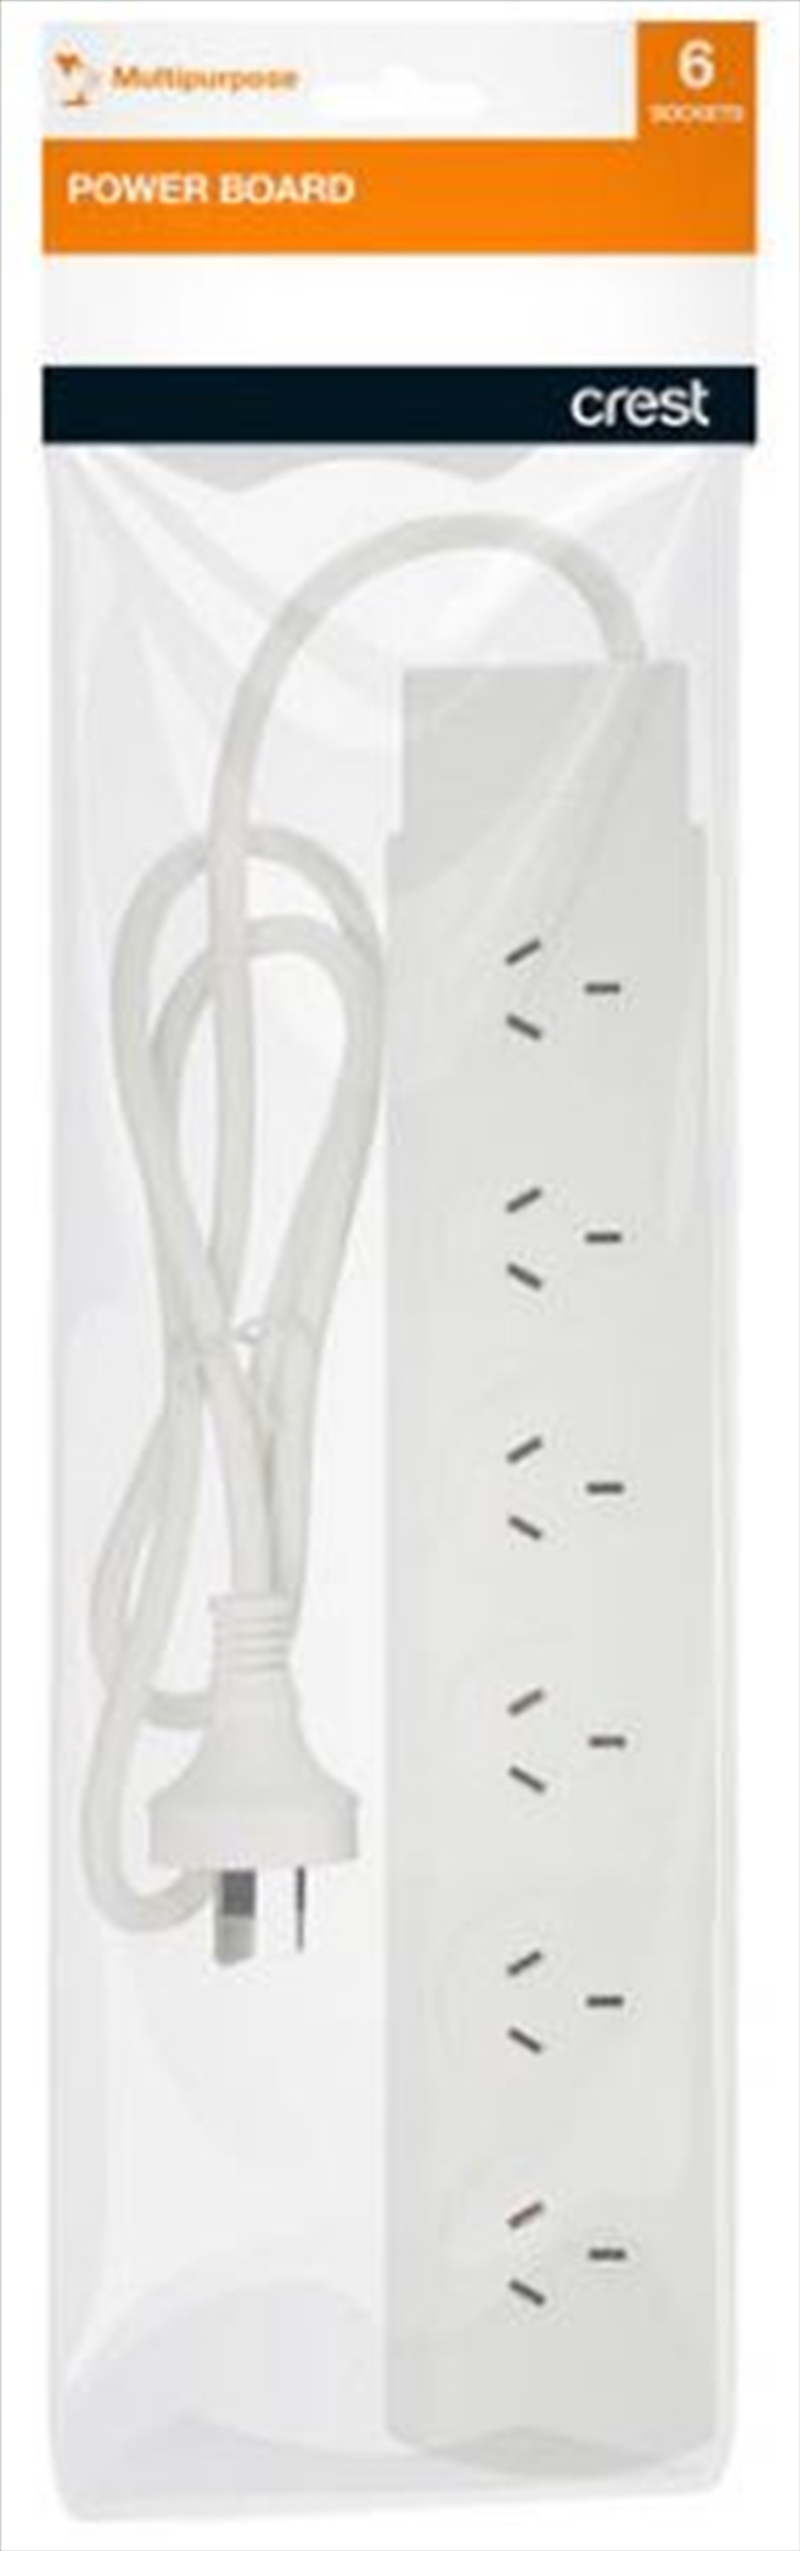 6 Outlet Overload Power Board/Product Detail/Power Adaptors